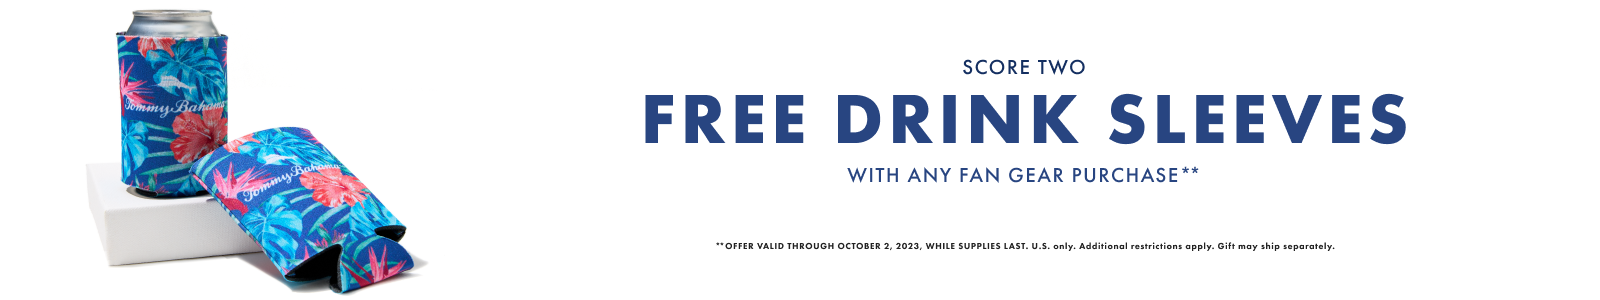 Score two free drink sleeves with any Fan Gear Purchase